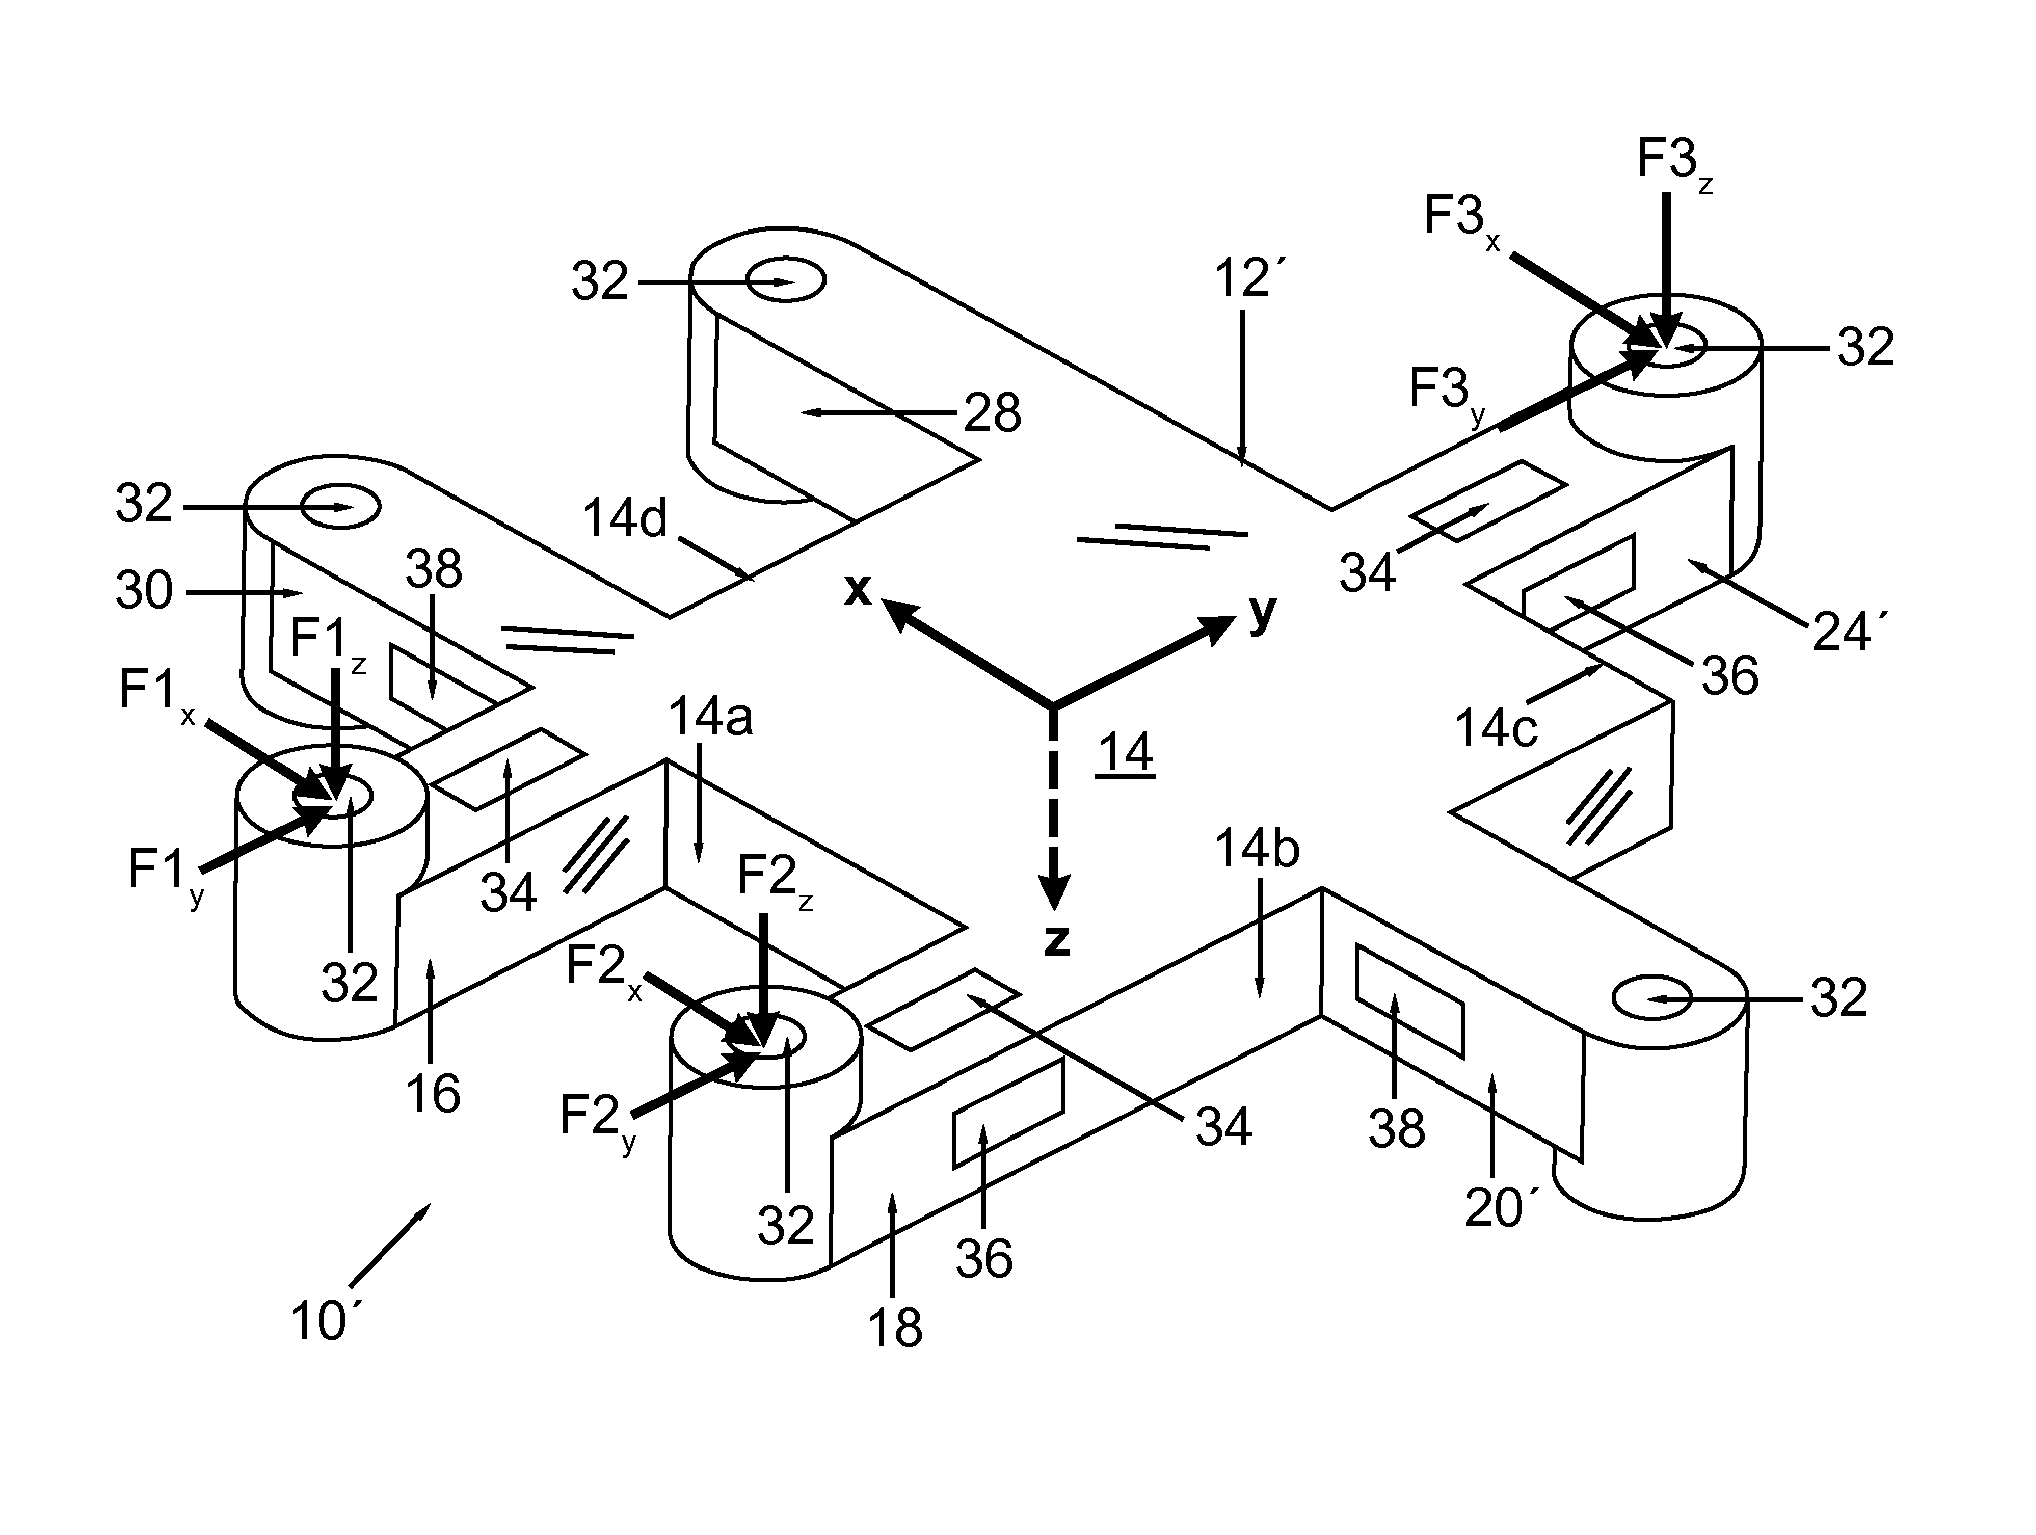 Load transducer and force measurement assembly using the same